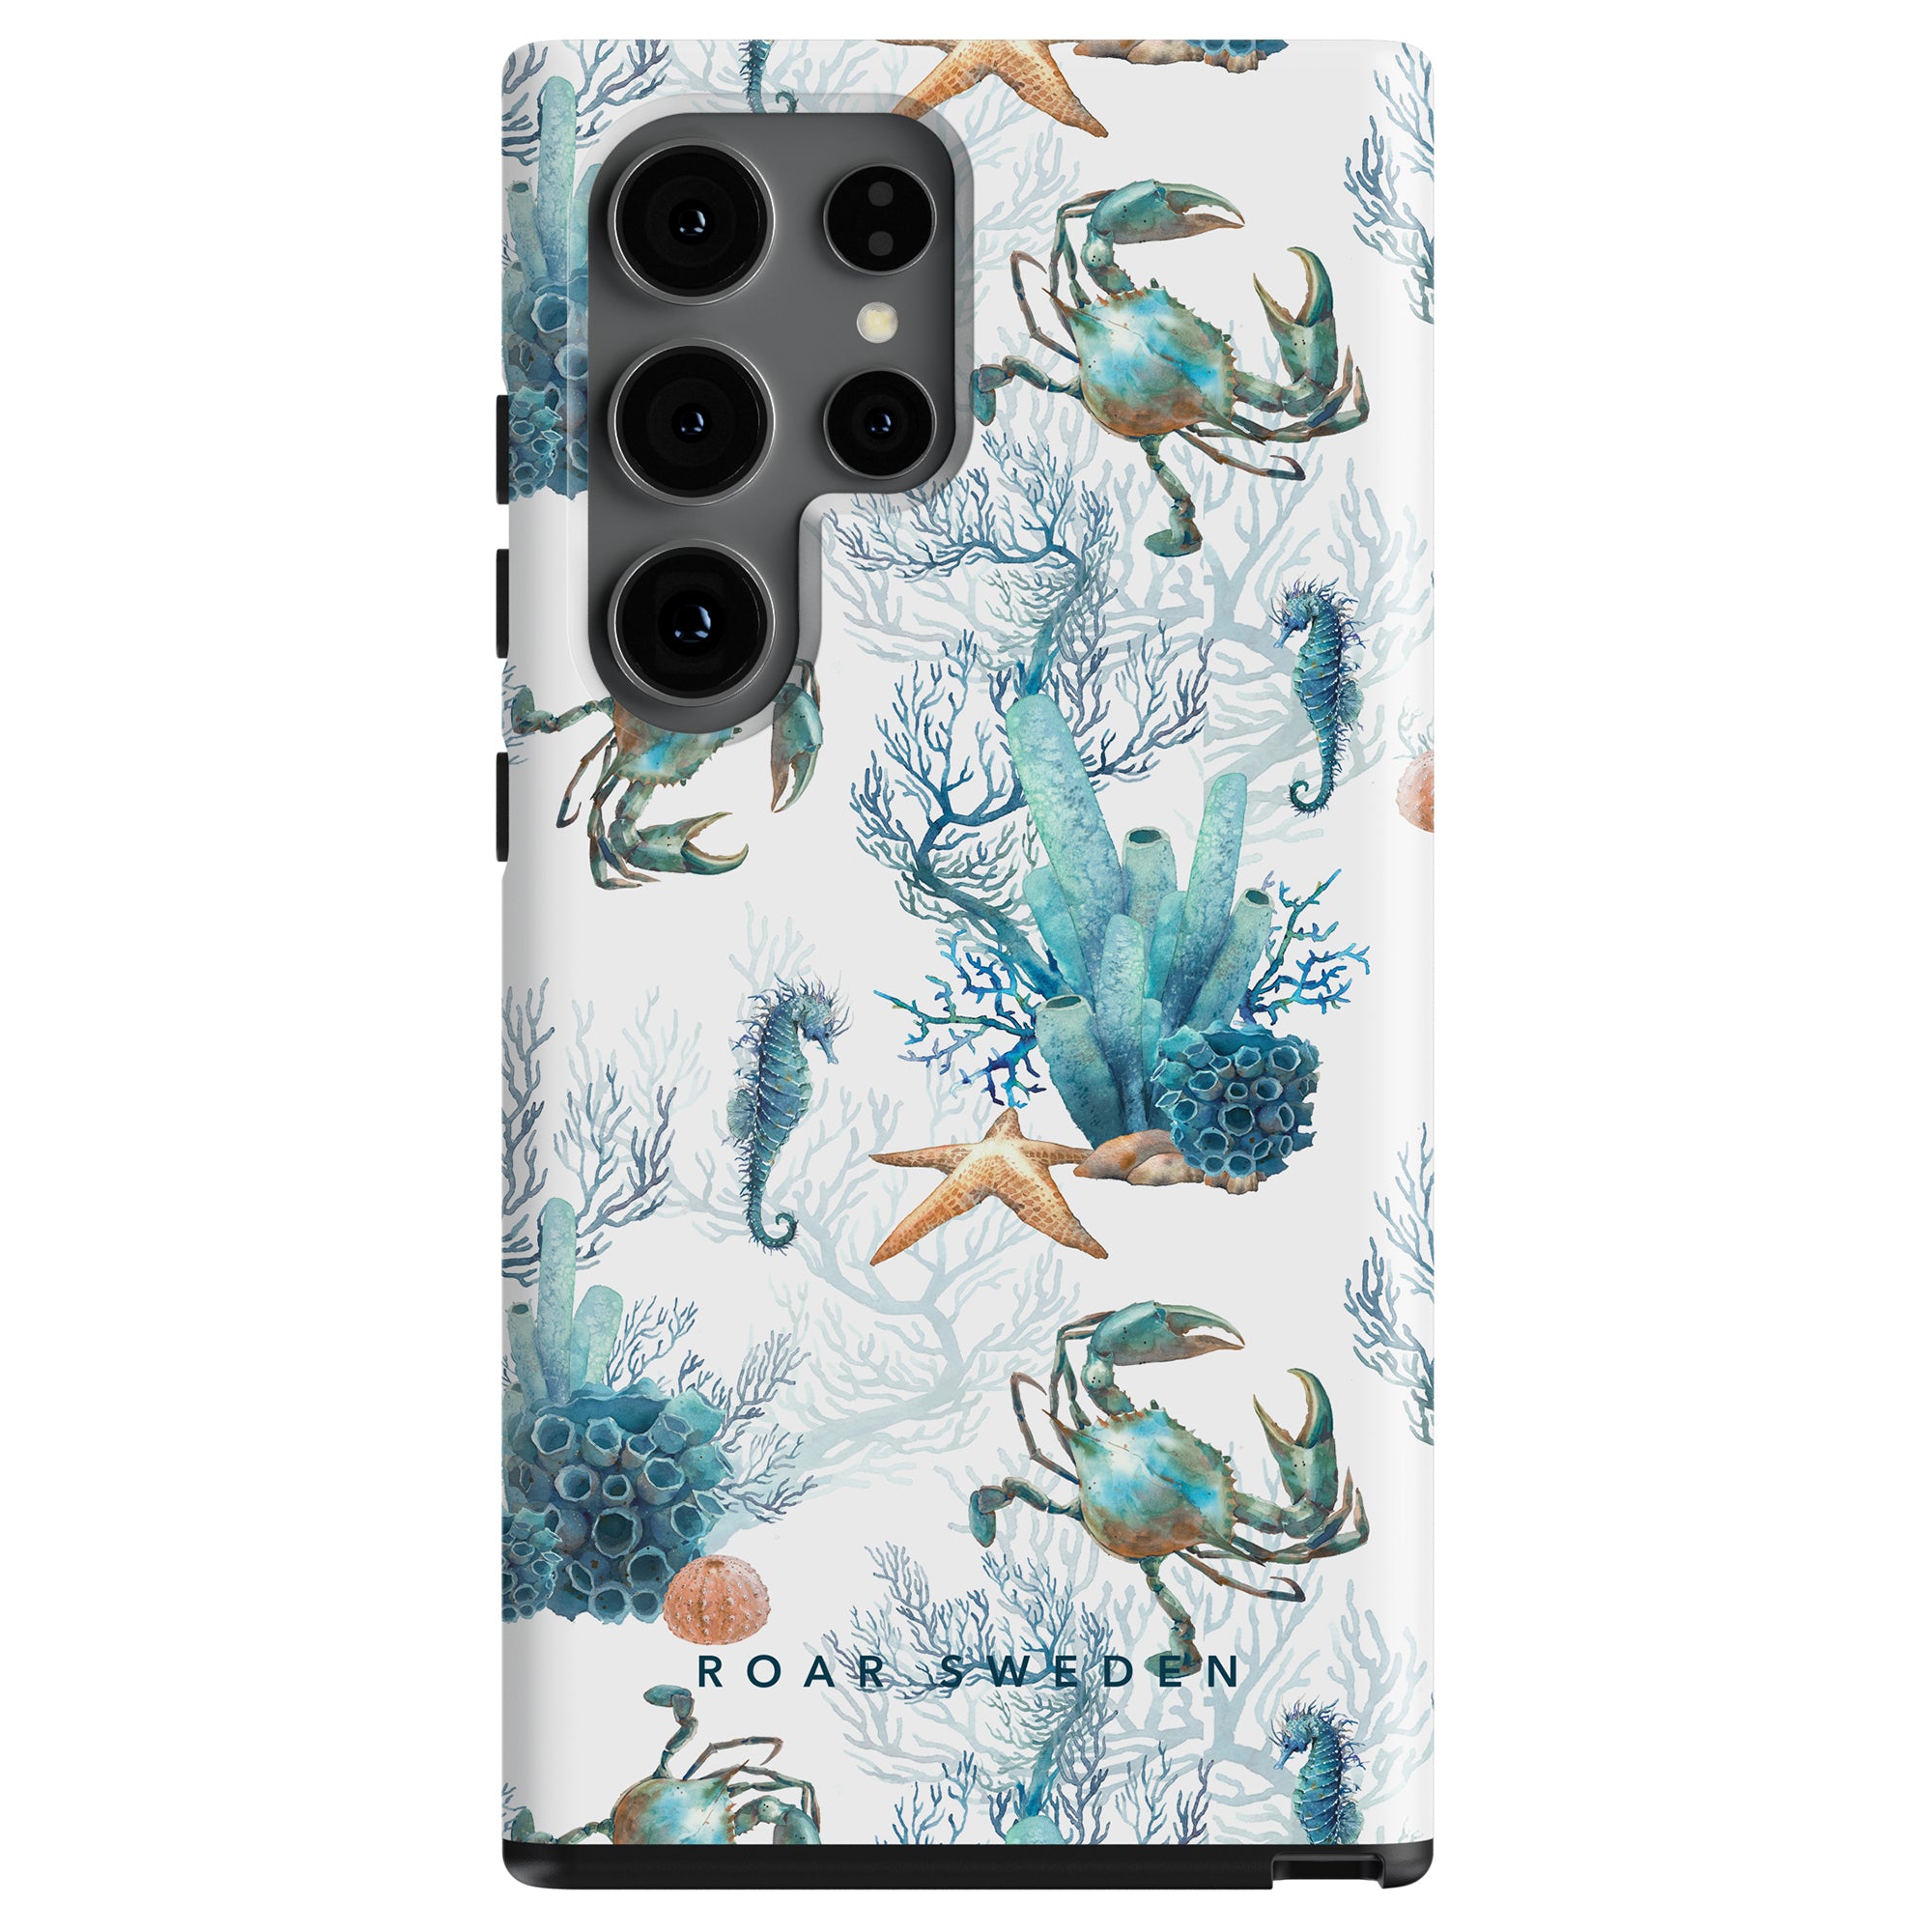 A smartphone case from our ocean collection featuring the Crab Reef - Tough Case design with seahorses, coral, and seaweed.